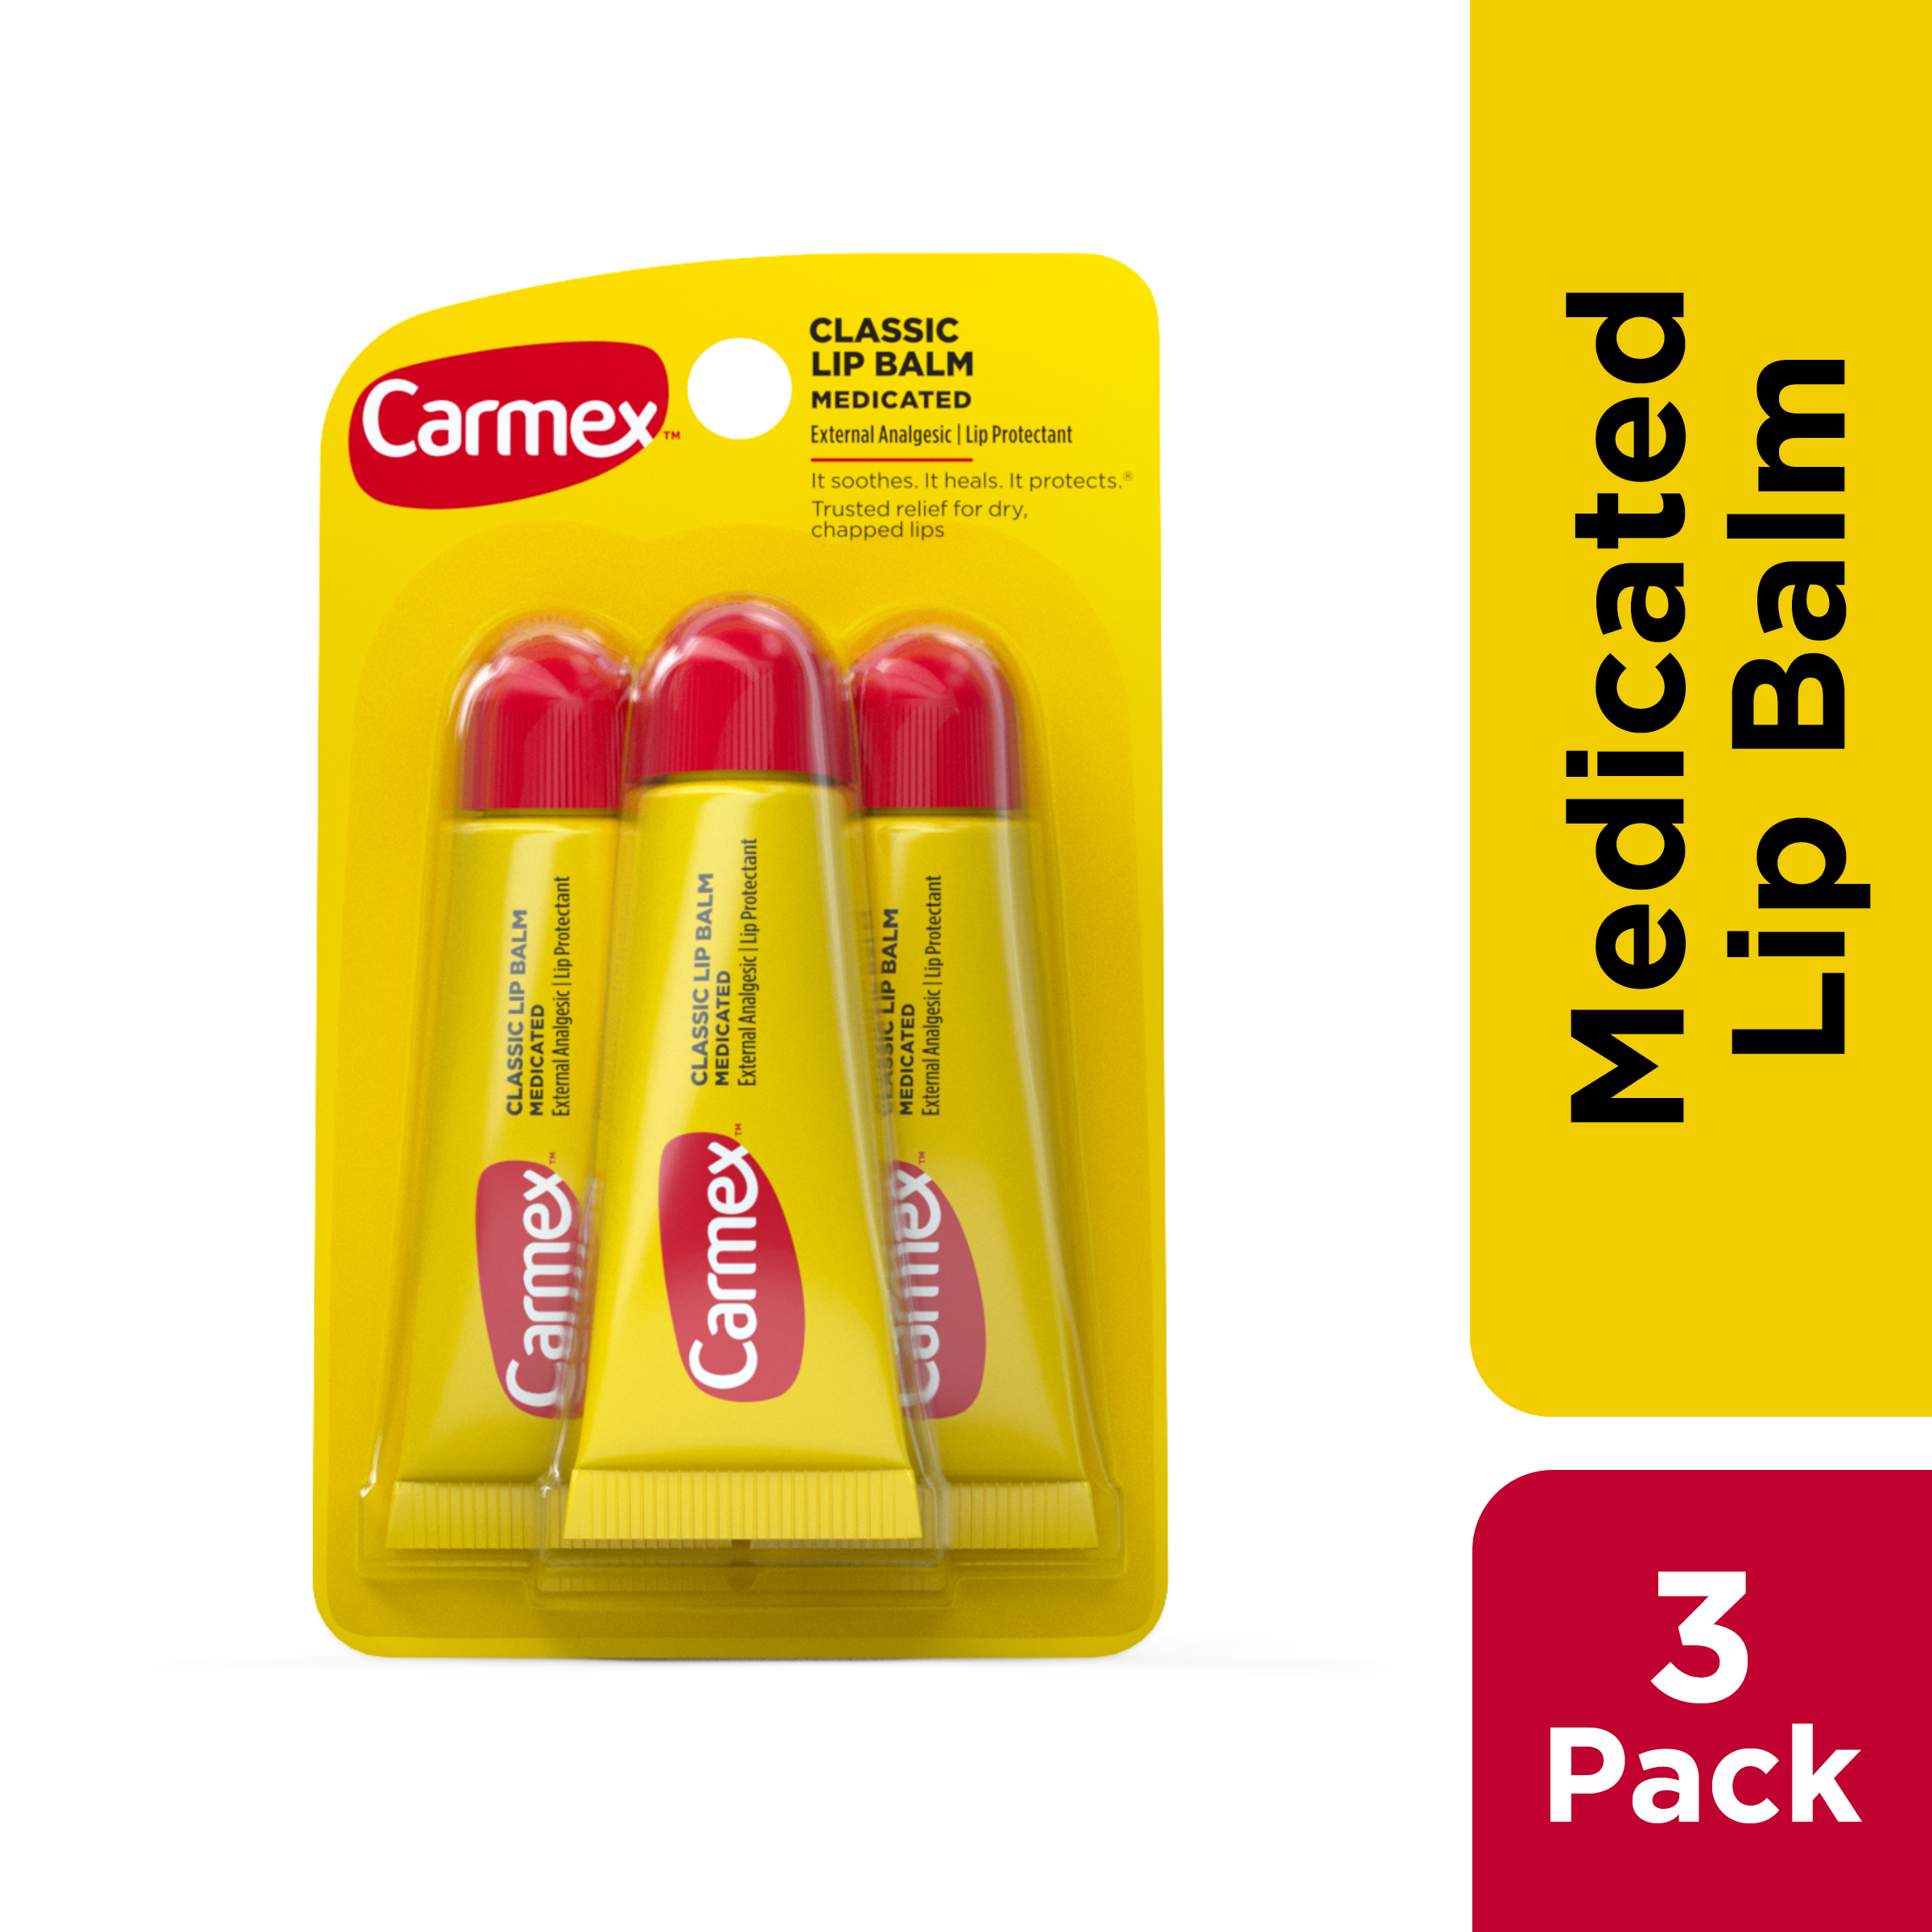 Carmex Classic Medicated Lip Balm Tubes, Lip Moisturizer, 3 Count (1 Pack of 3) - image 1 of 12